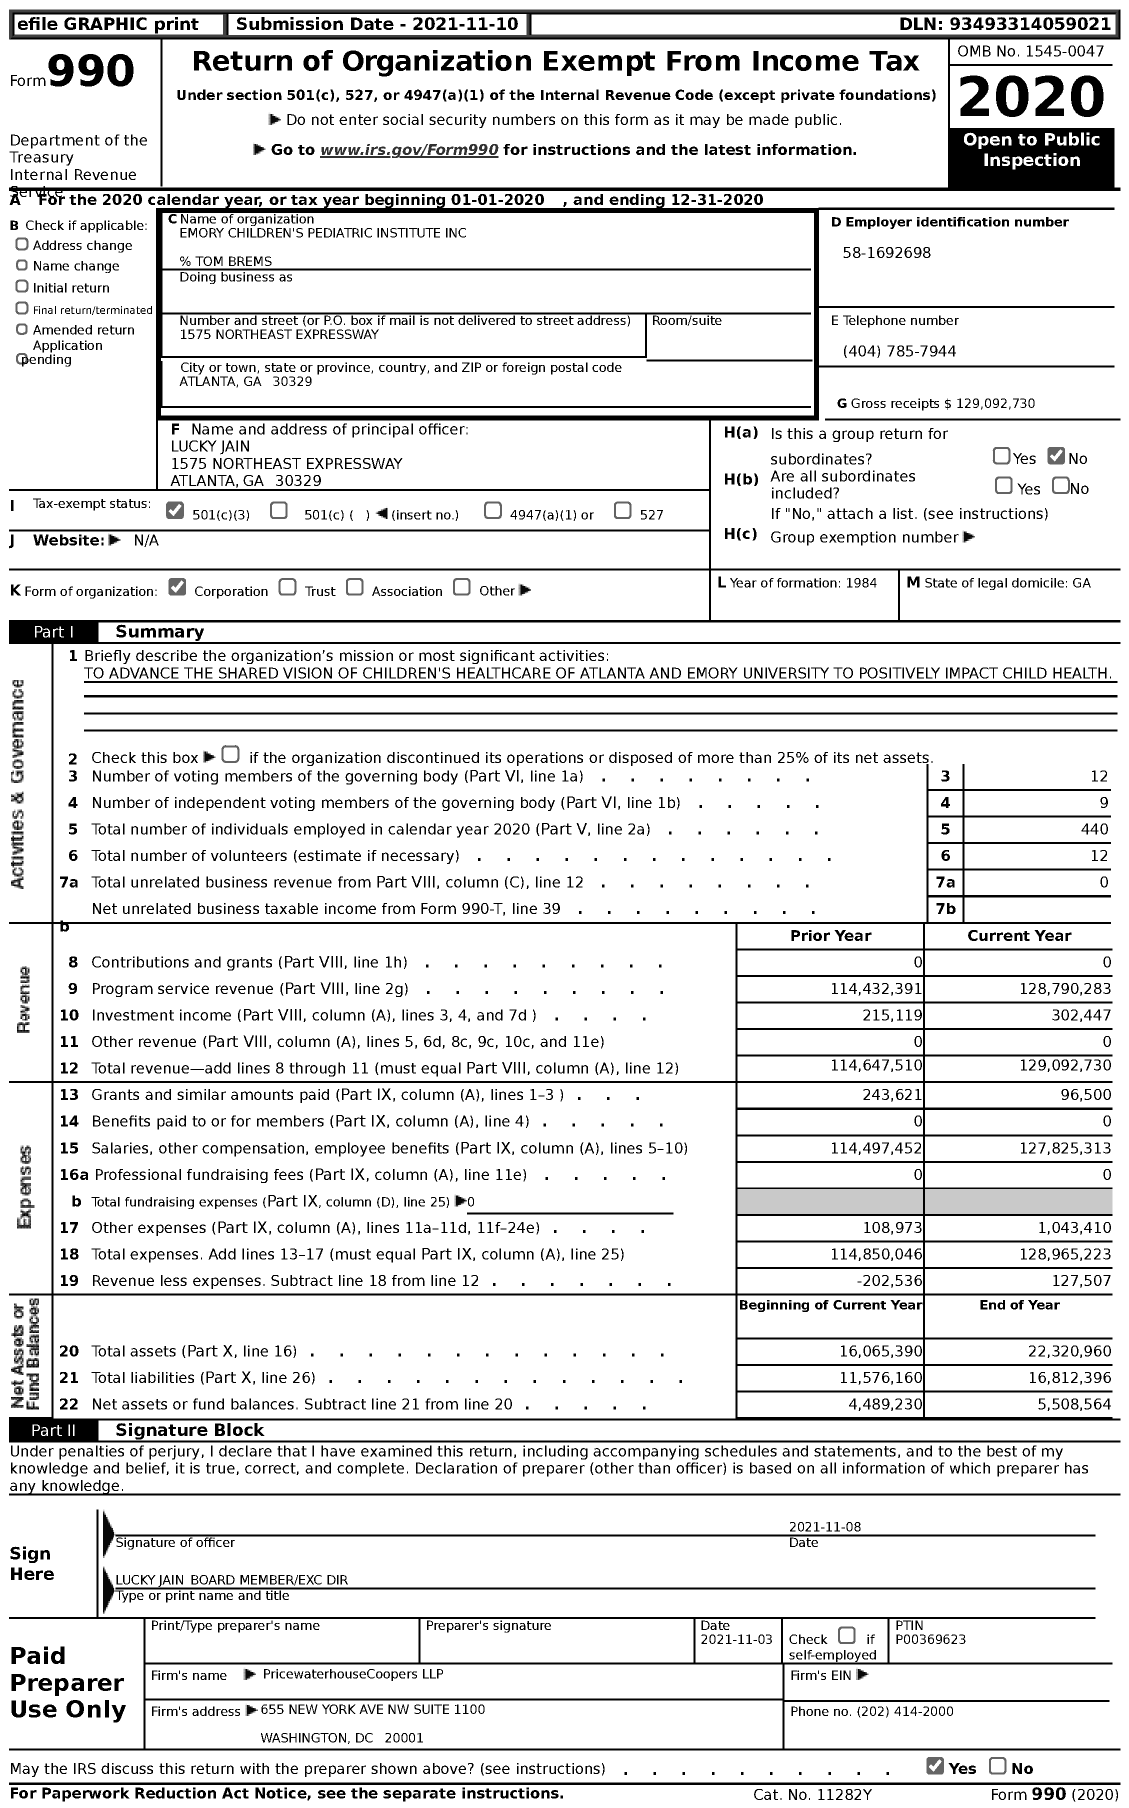 Image of first page of 2020 Form 990 for Emory Children's Pediatric Institute